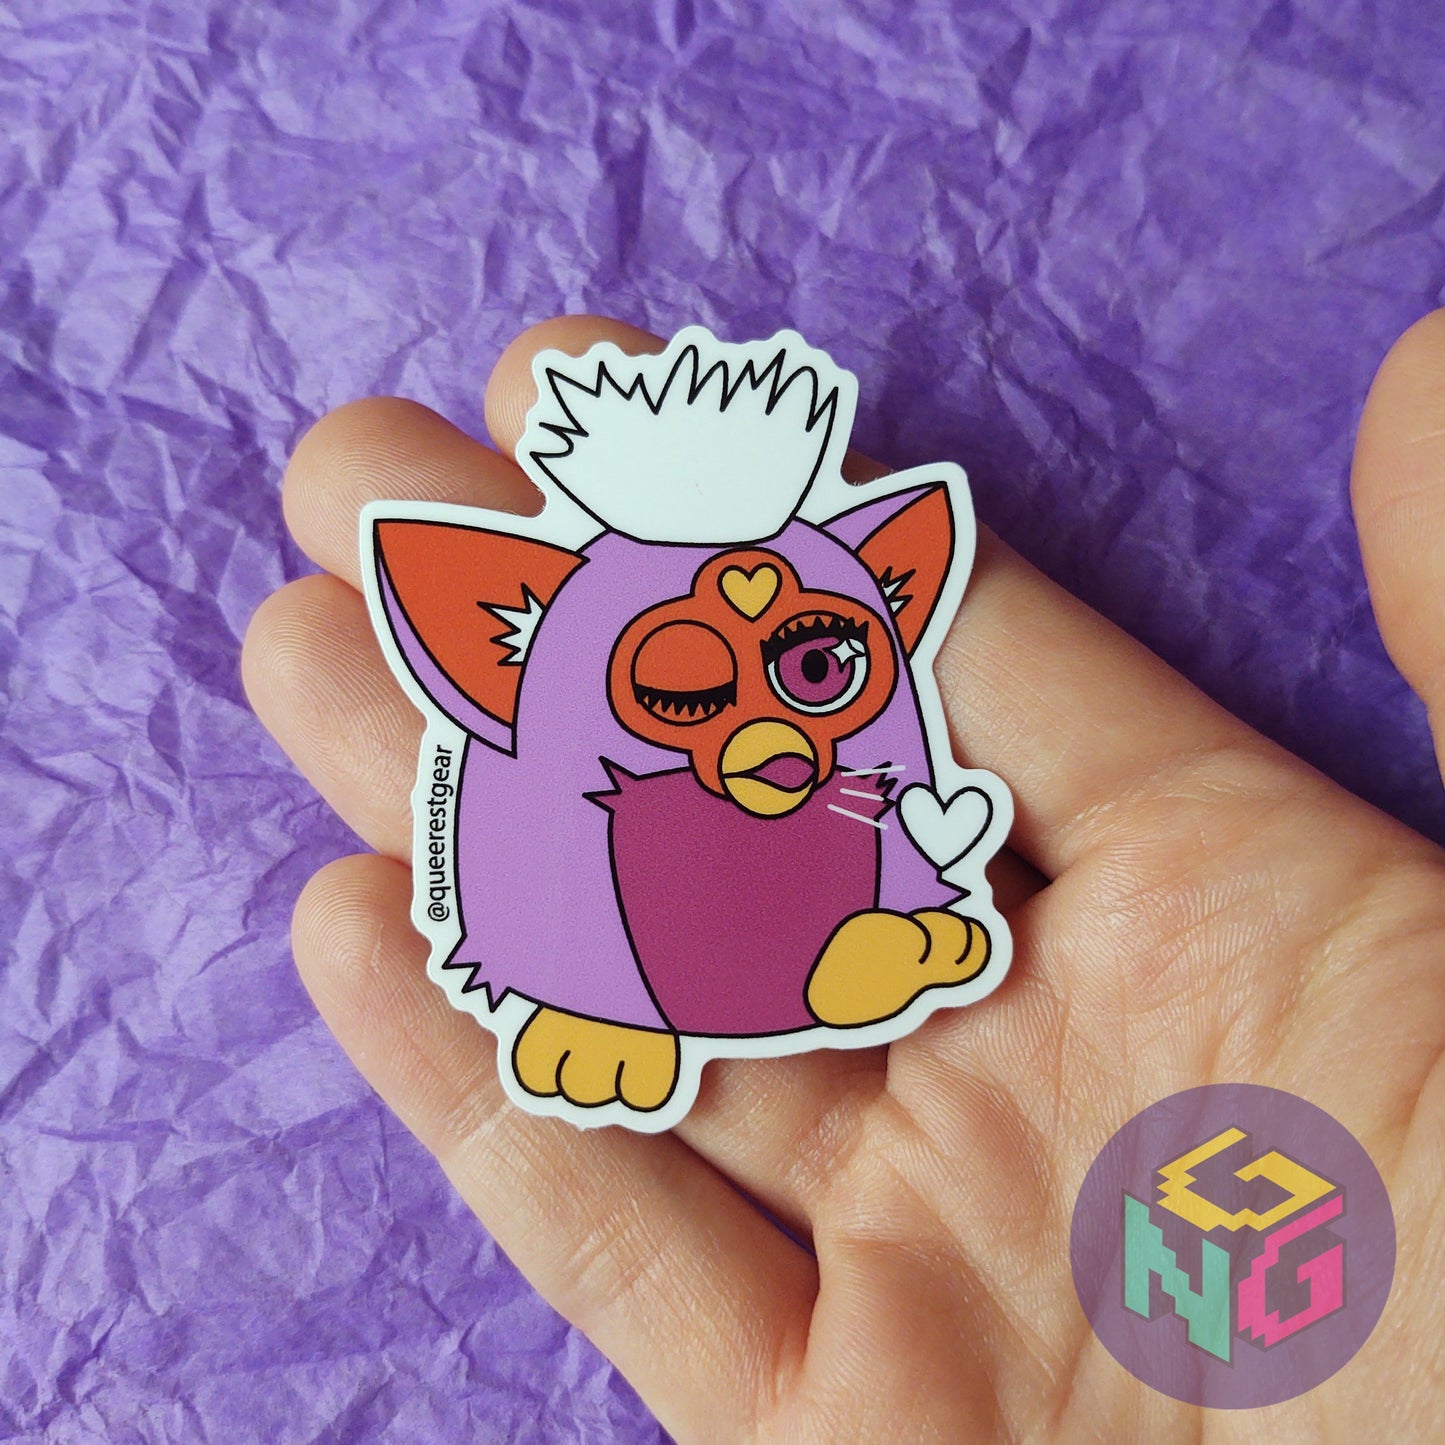 lesbian furby sticker blowing a kiss being held in a hand in front of a purple background